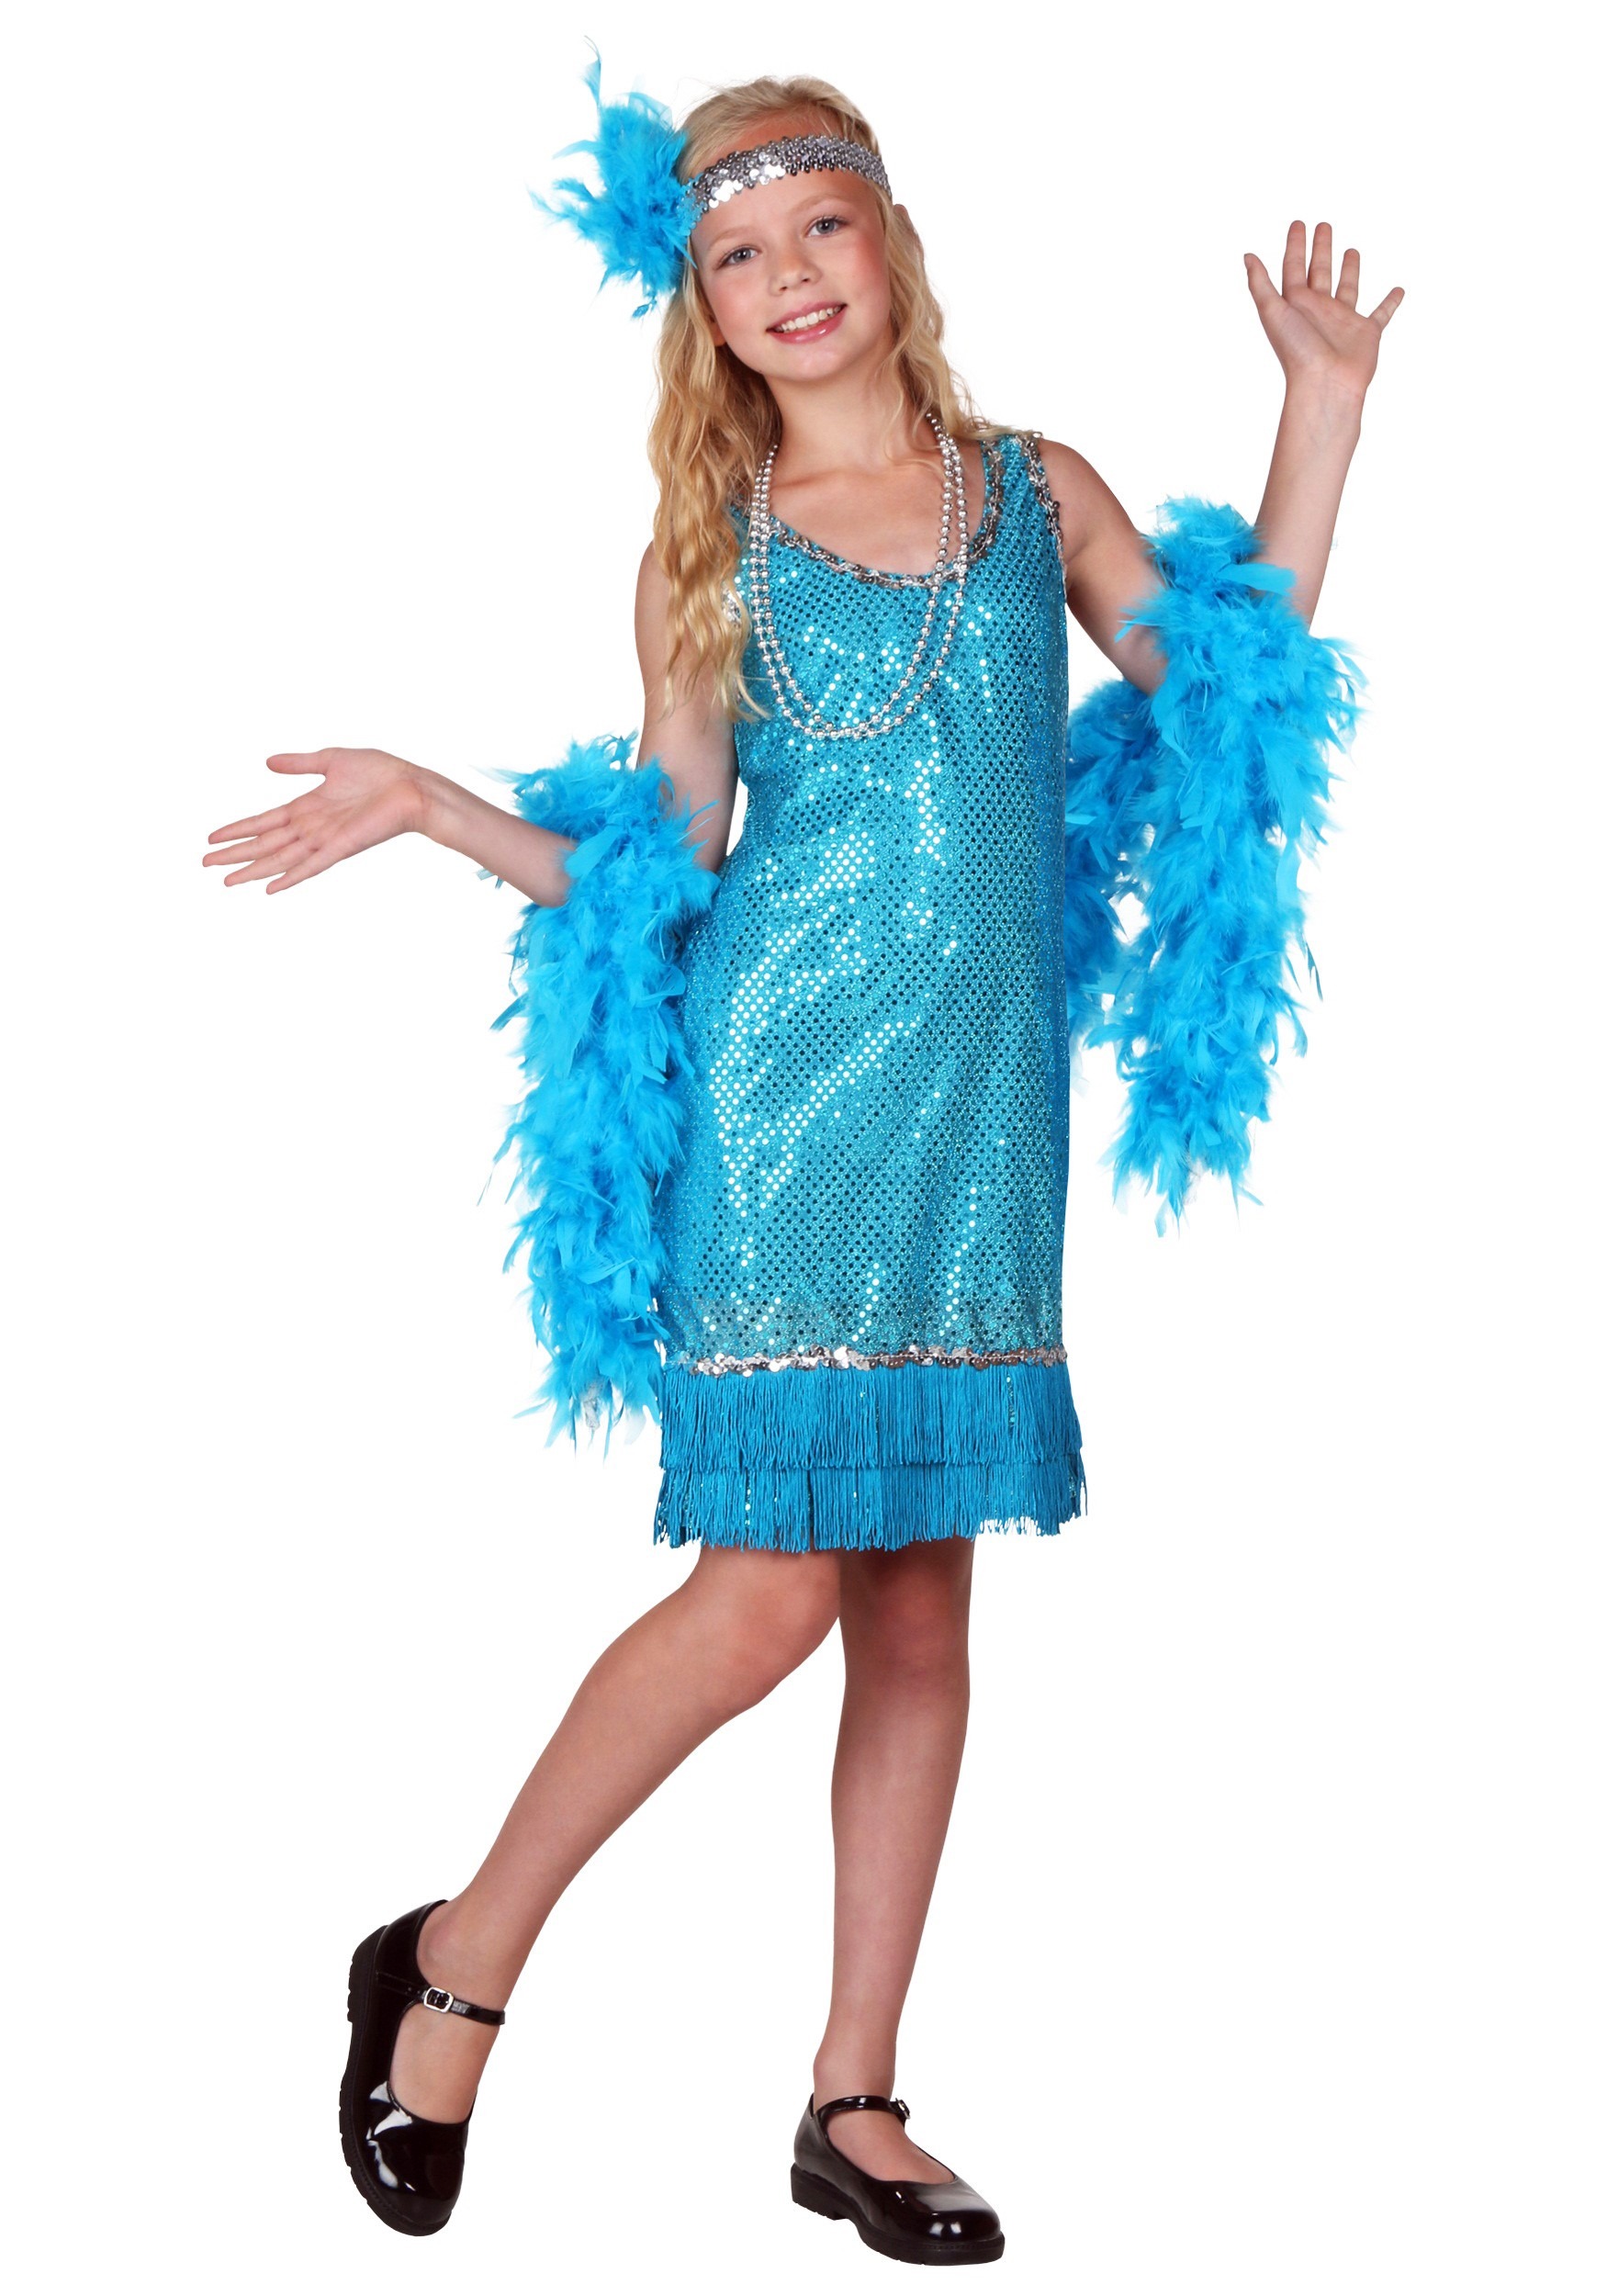 Photos - Fancy Dress A&D FUN Costumes Turquoise Sequin and Fringe Flapper Costume For Kids Blue FUN 